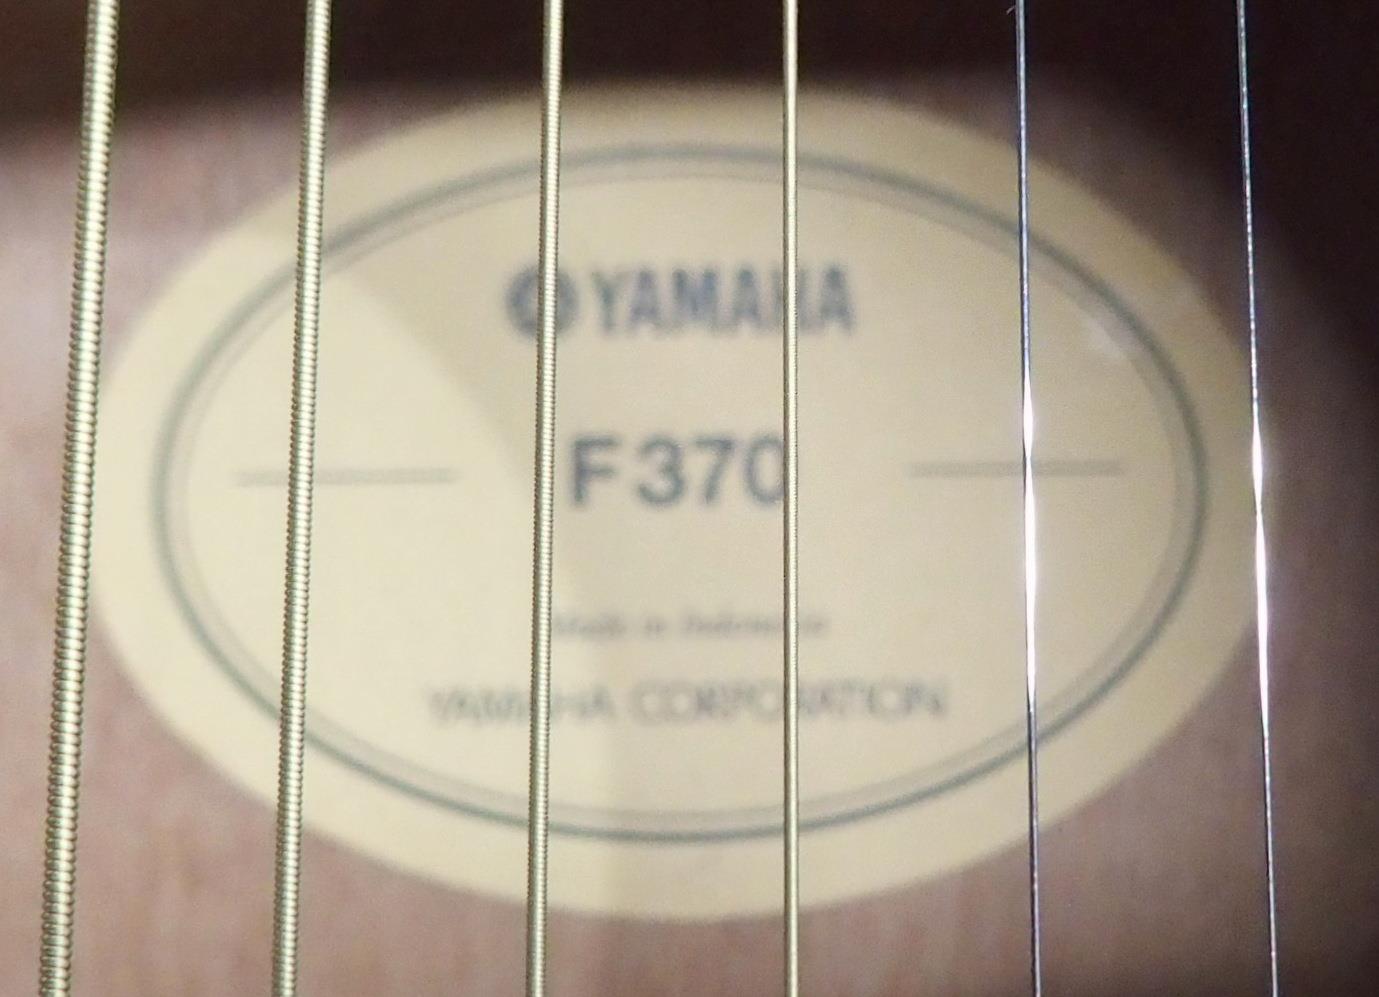 Yamaha acoustic guitar model F370 made in Indonesia  Condition Report:Available upon request - Image 3 of 3